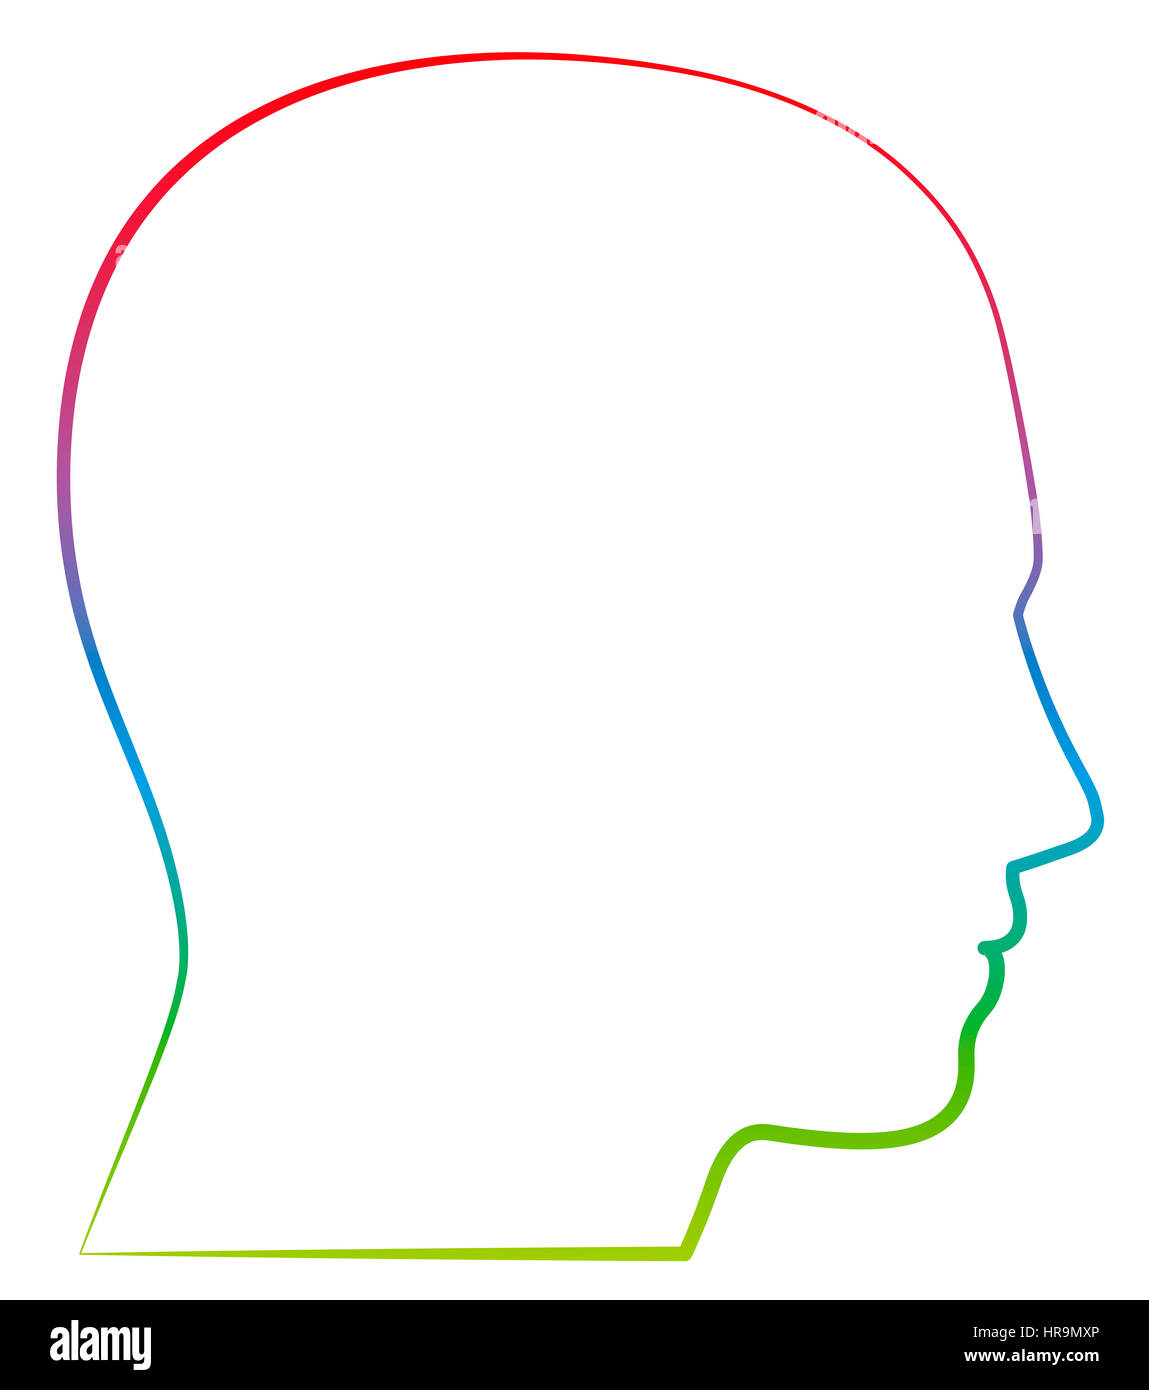 Head, profile view - colored outline illustration on white background. Stock Photo